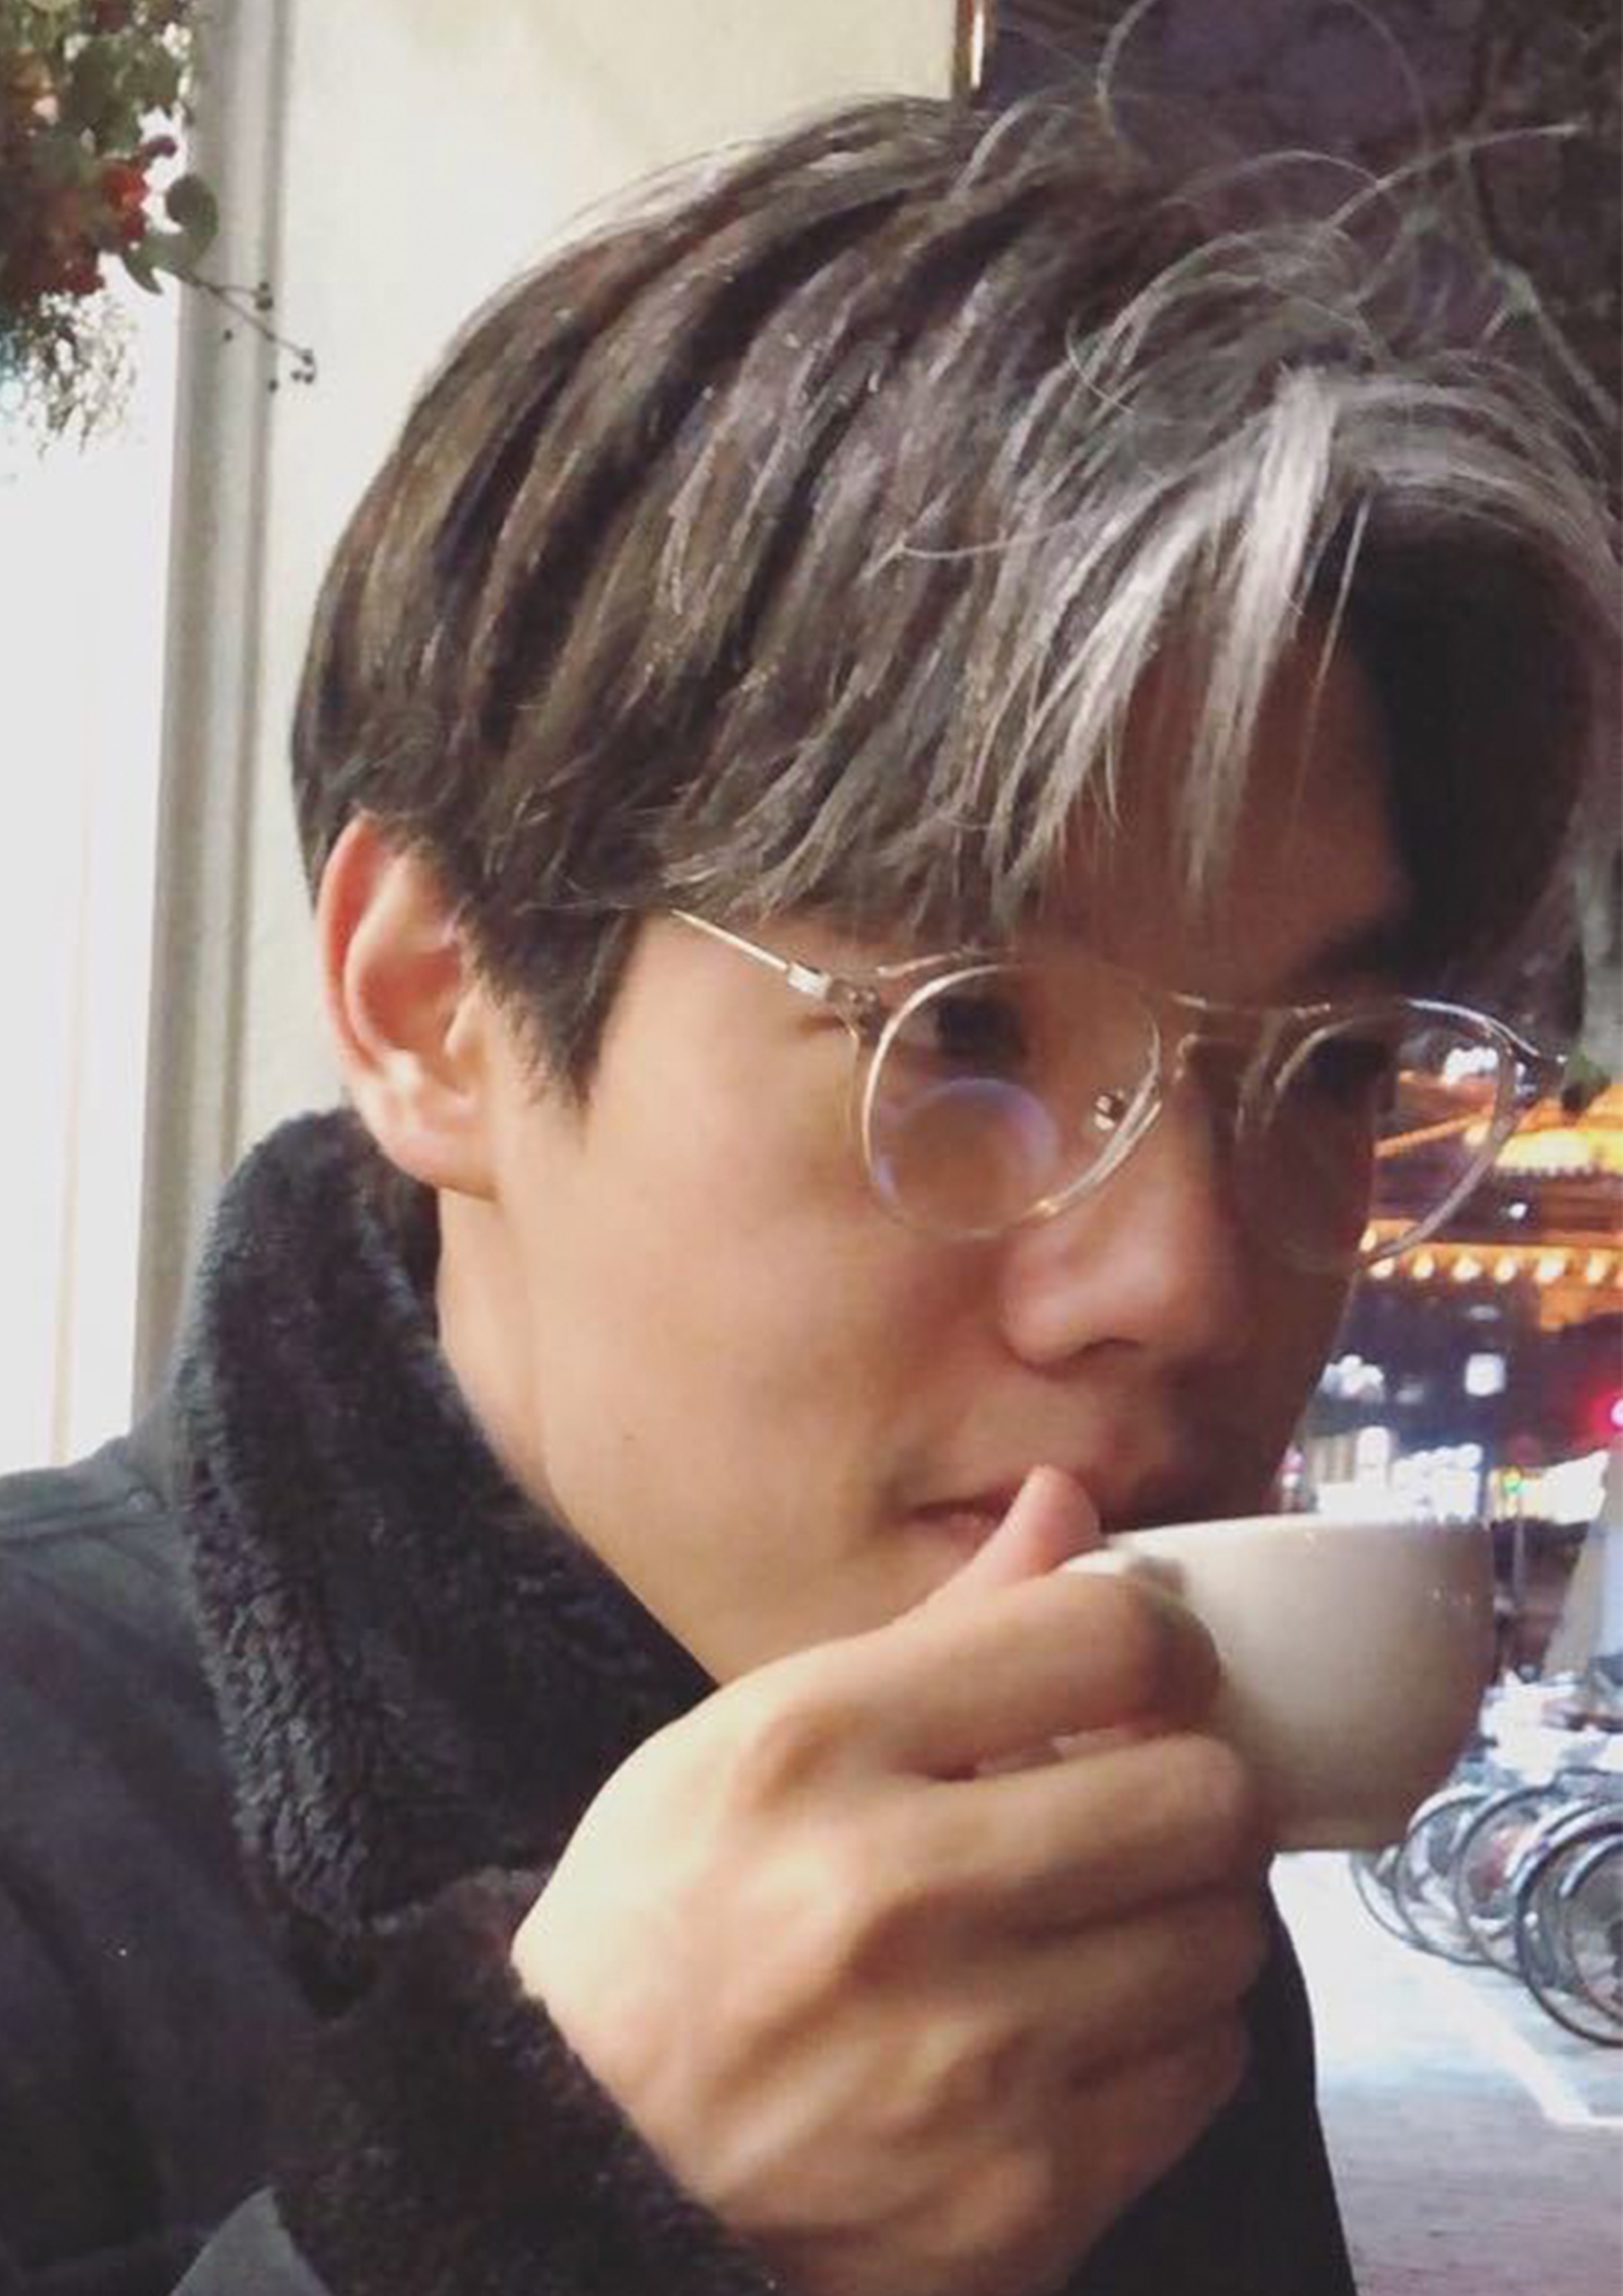 This image shows you a young artist with marron and white colour hair, wearing a pair of glasses. He was wearing a black winter coat with fur collar , drinking espresso.